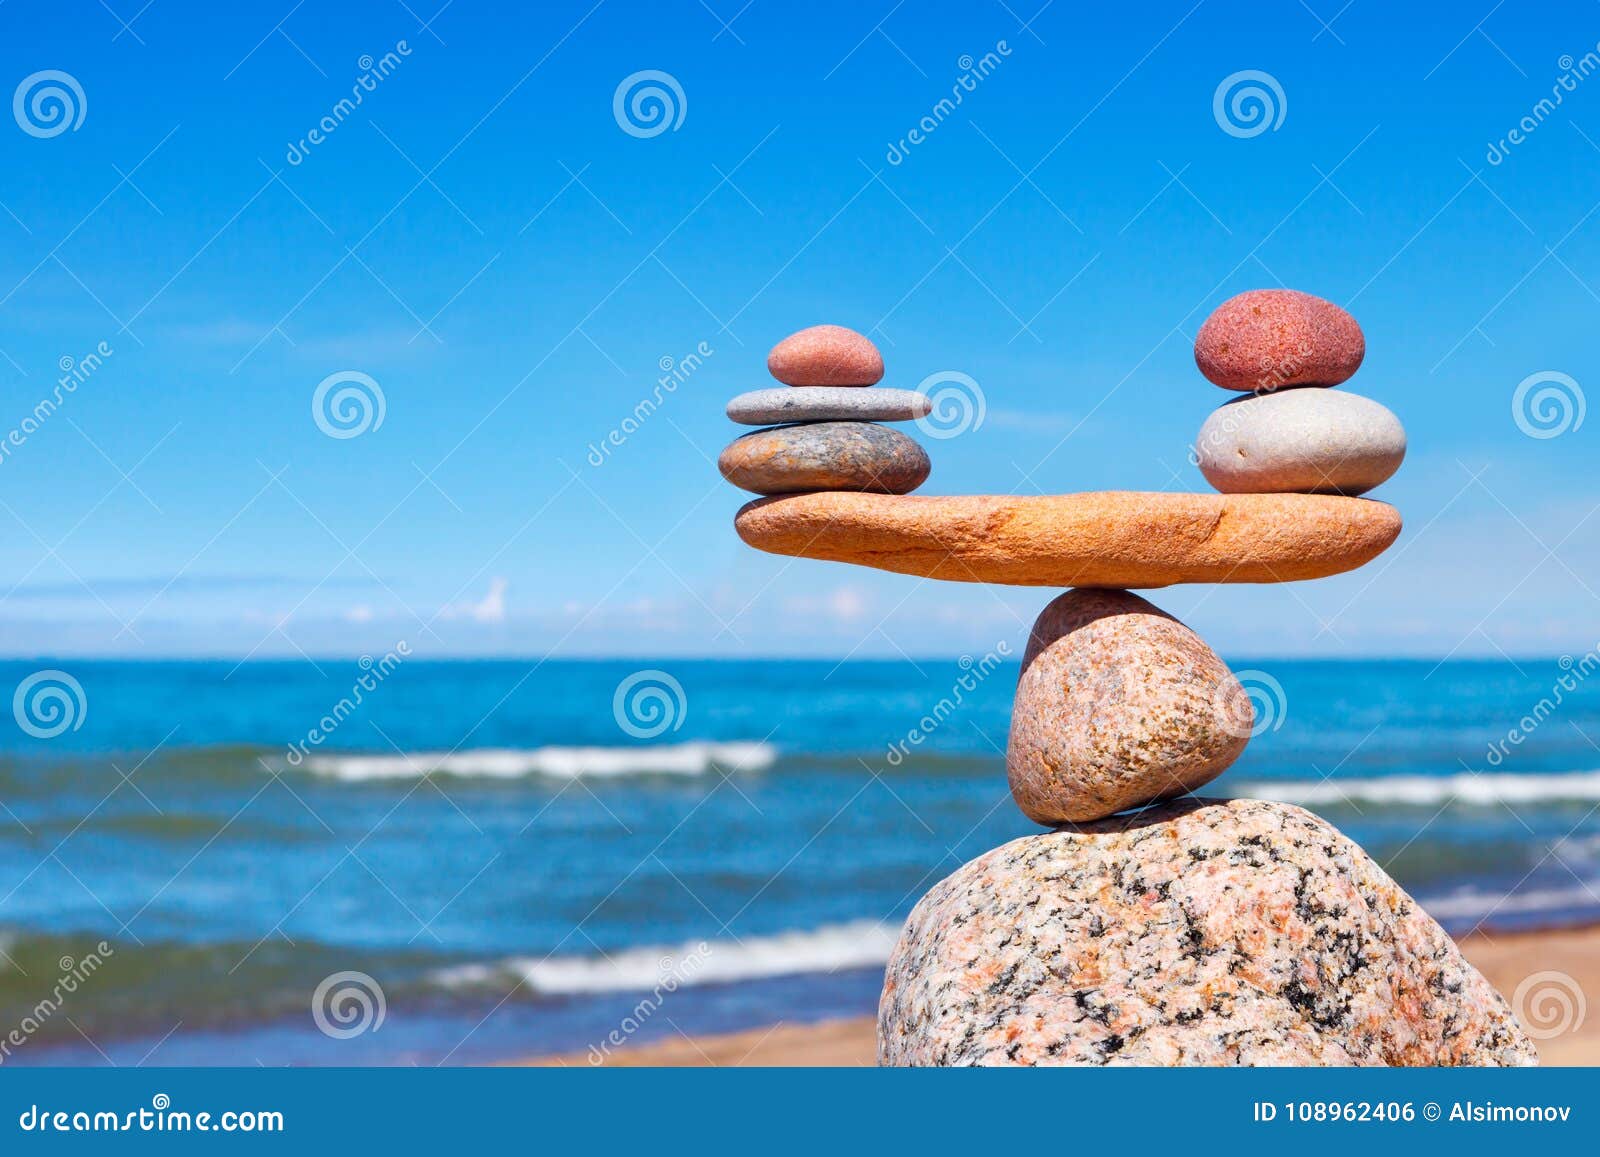 concept of harmony and balance. balance stones against the sea.